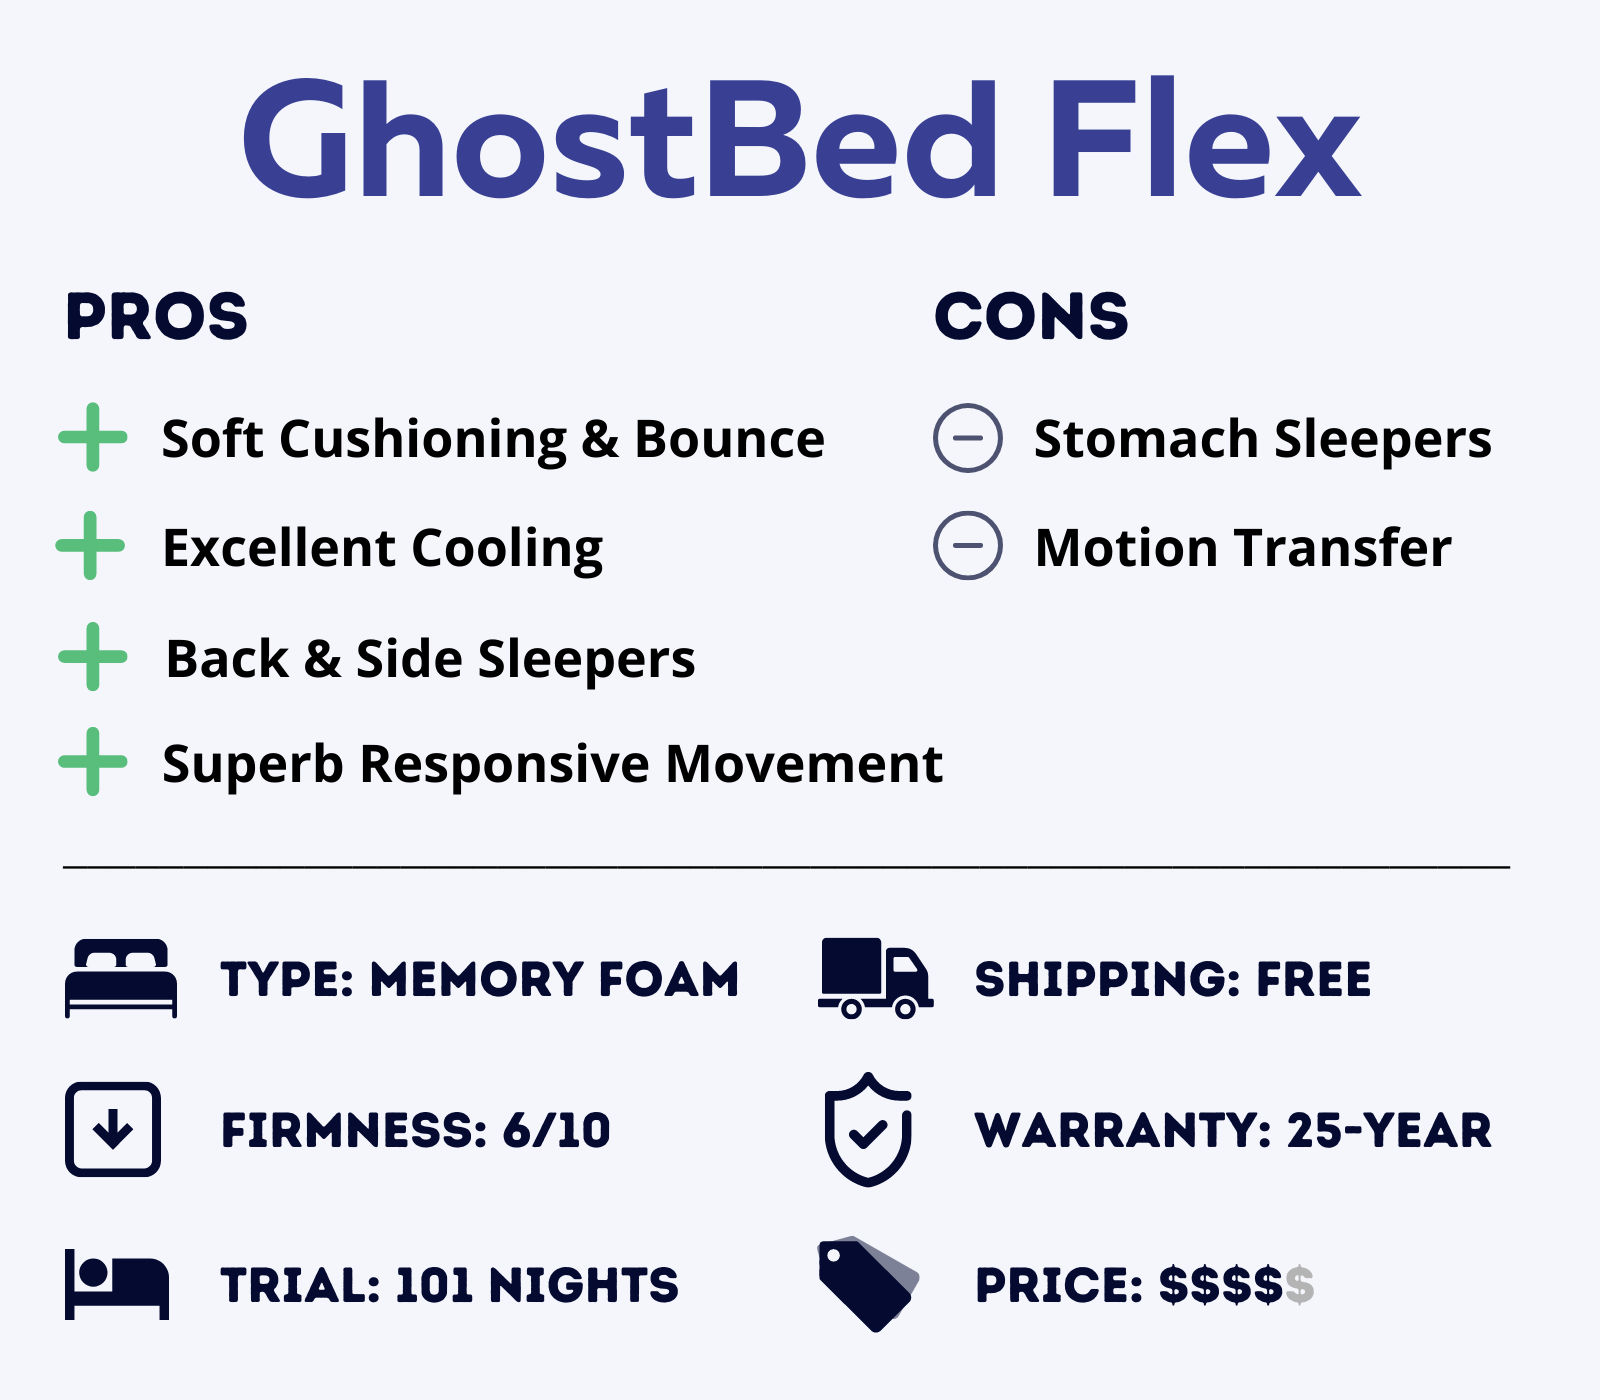 ghostbed flex memory foam hybrid mattress features overview